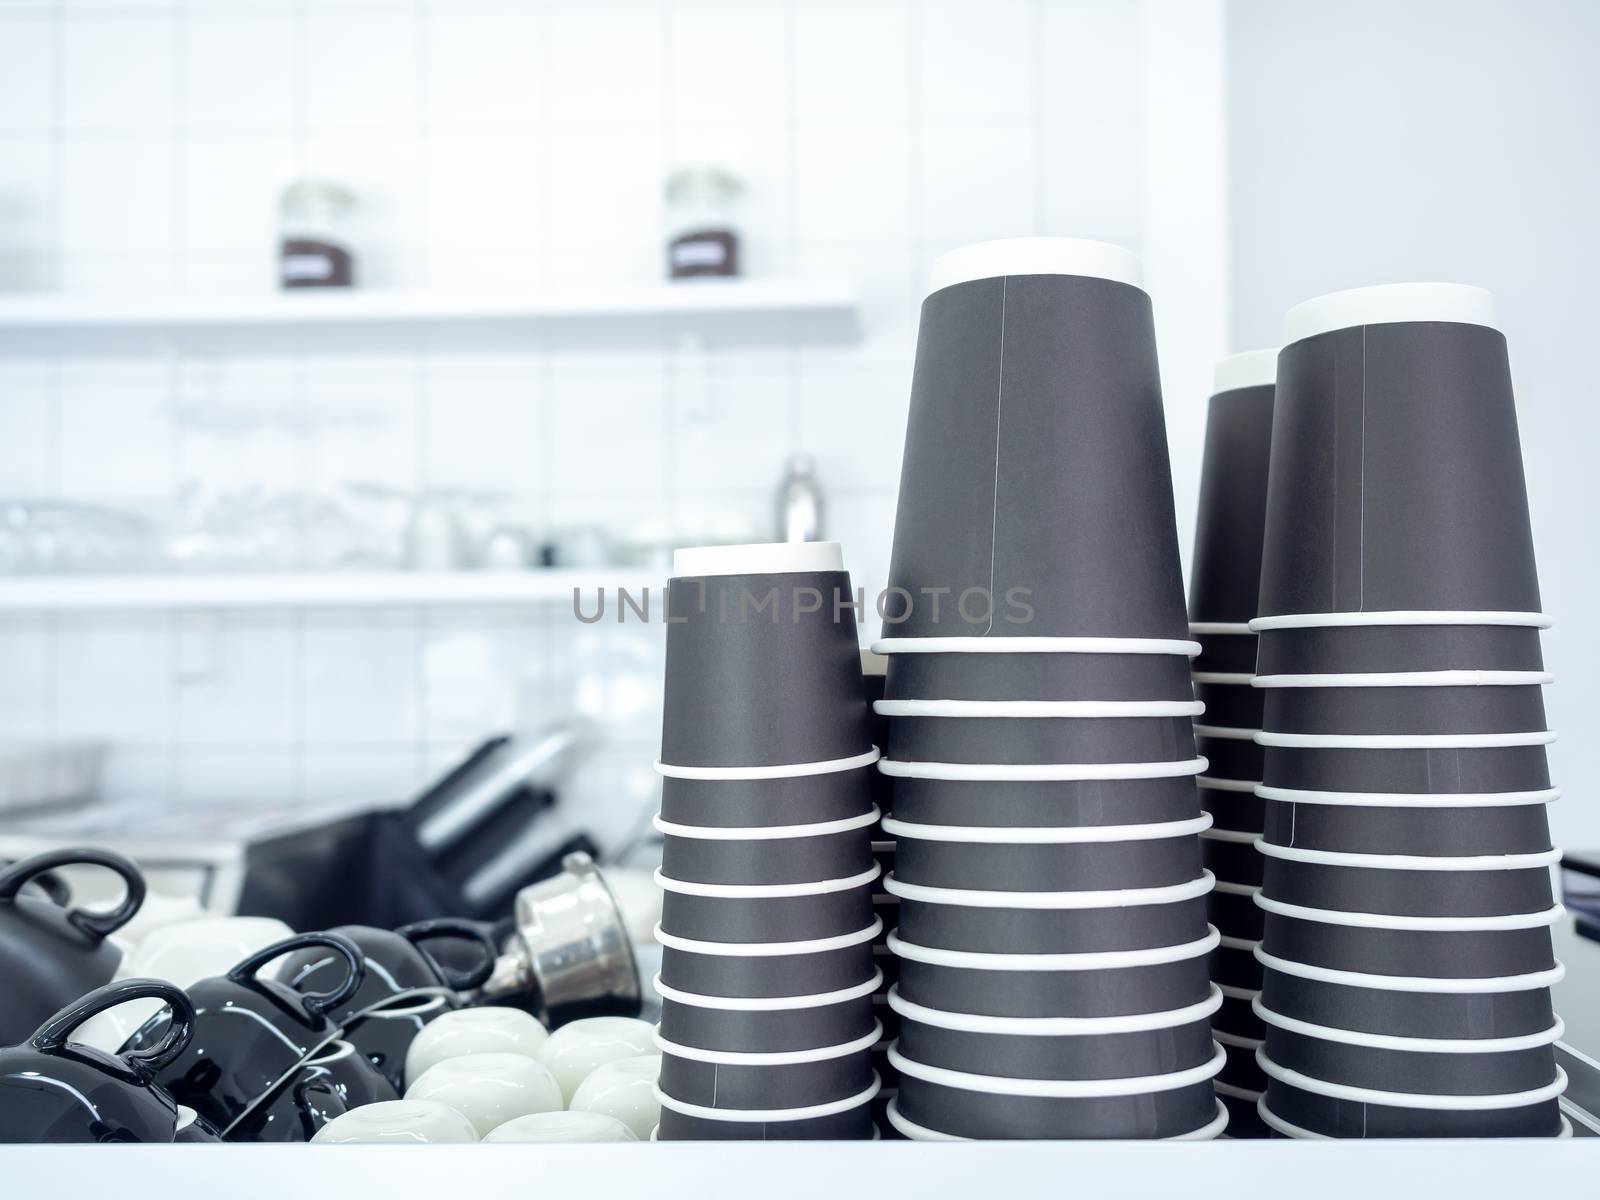 Black paper coffee cups stacked in a pile. Row of black paper cups upside down on shelf on white cafe background with copy space.